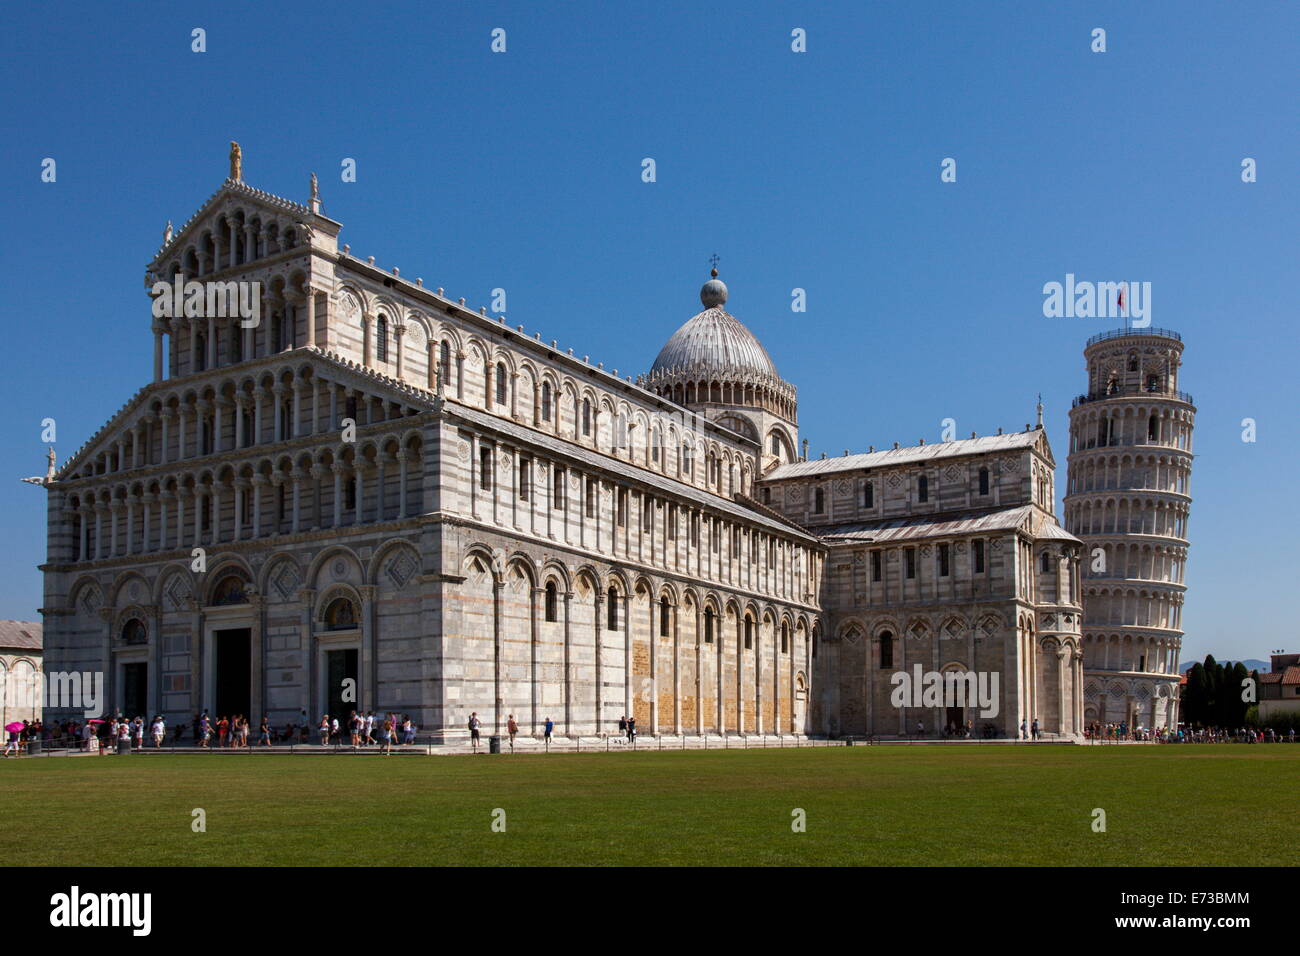 Duomo (Cathedral) with Leaning Tower behind, UNESCO World Heritage Site, Pisa, Tuscany, Italy, Europe Stock Photo